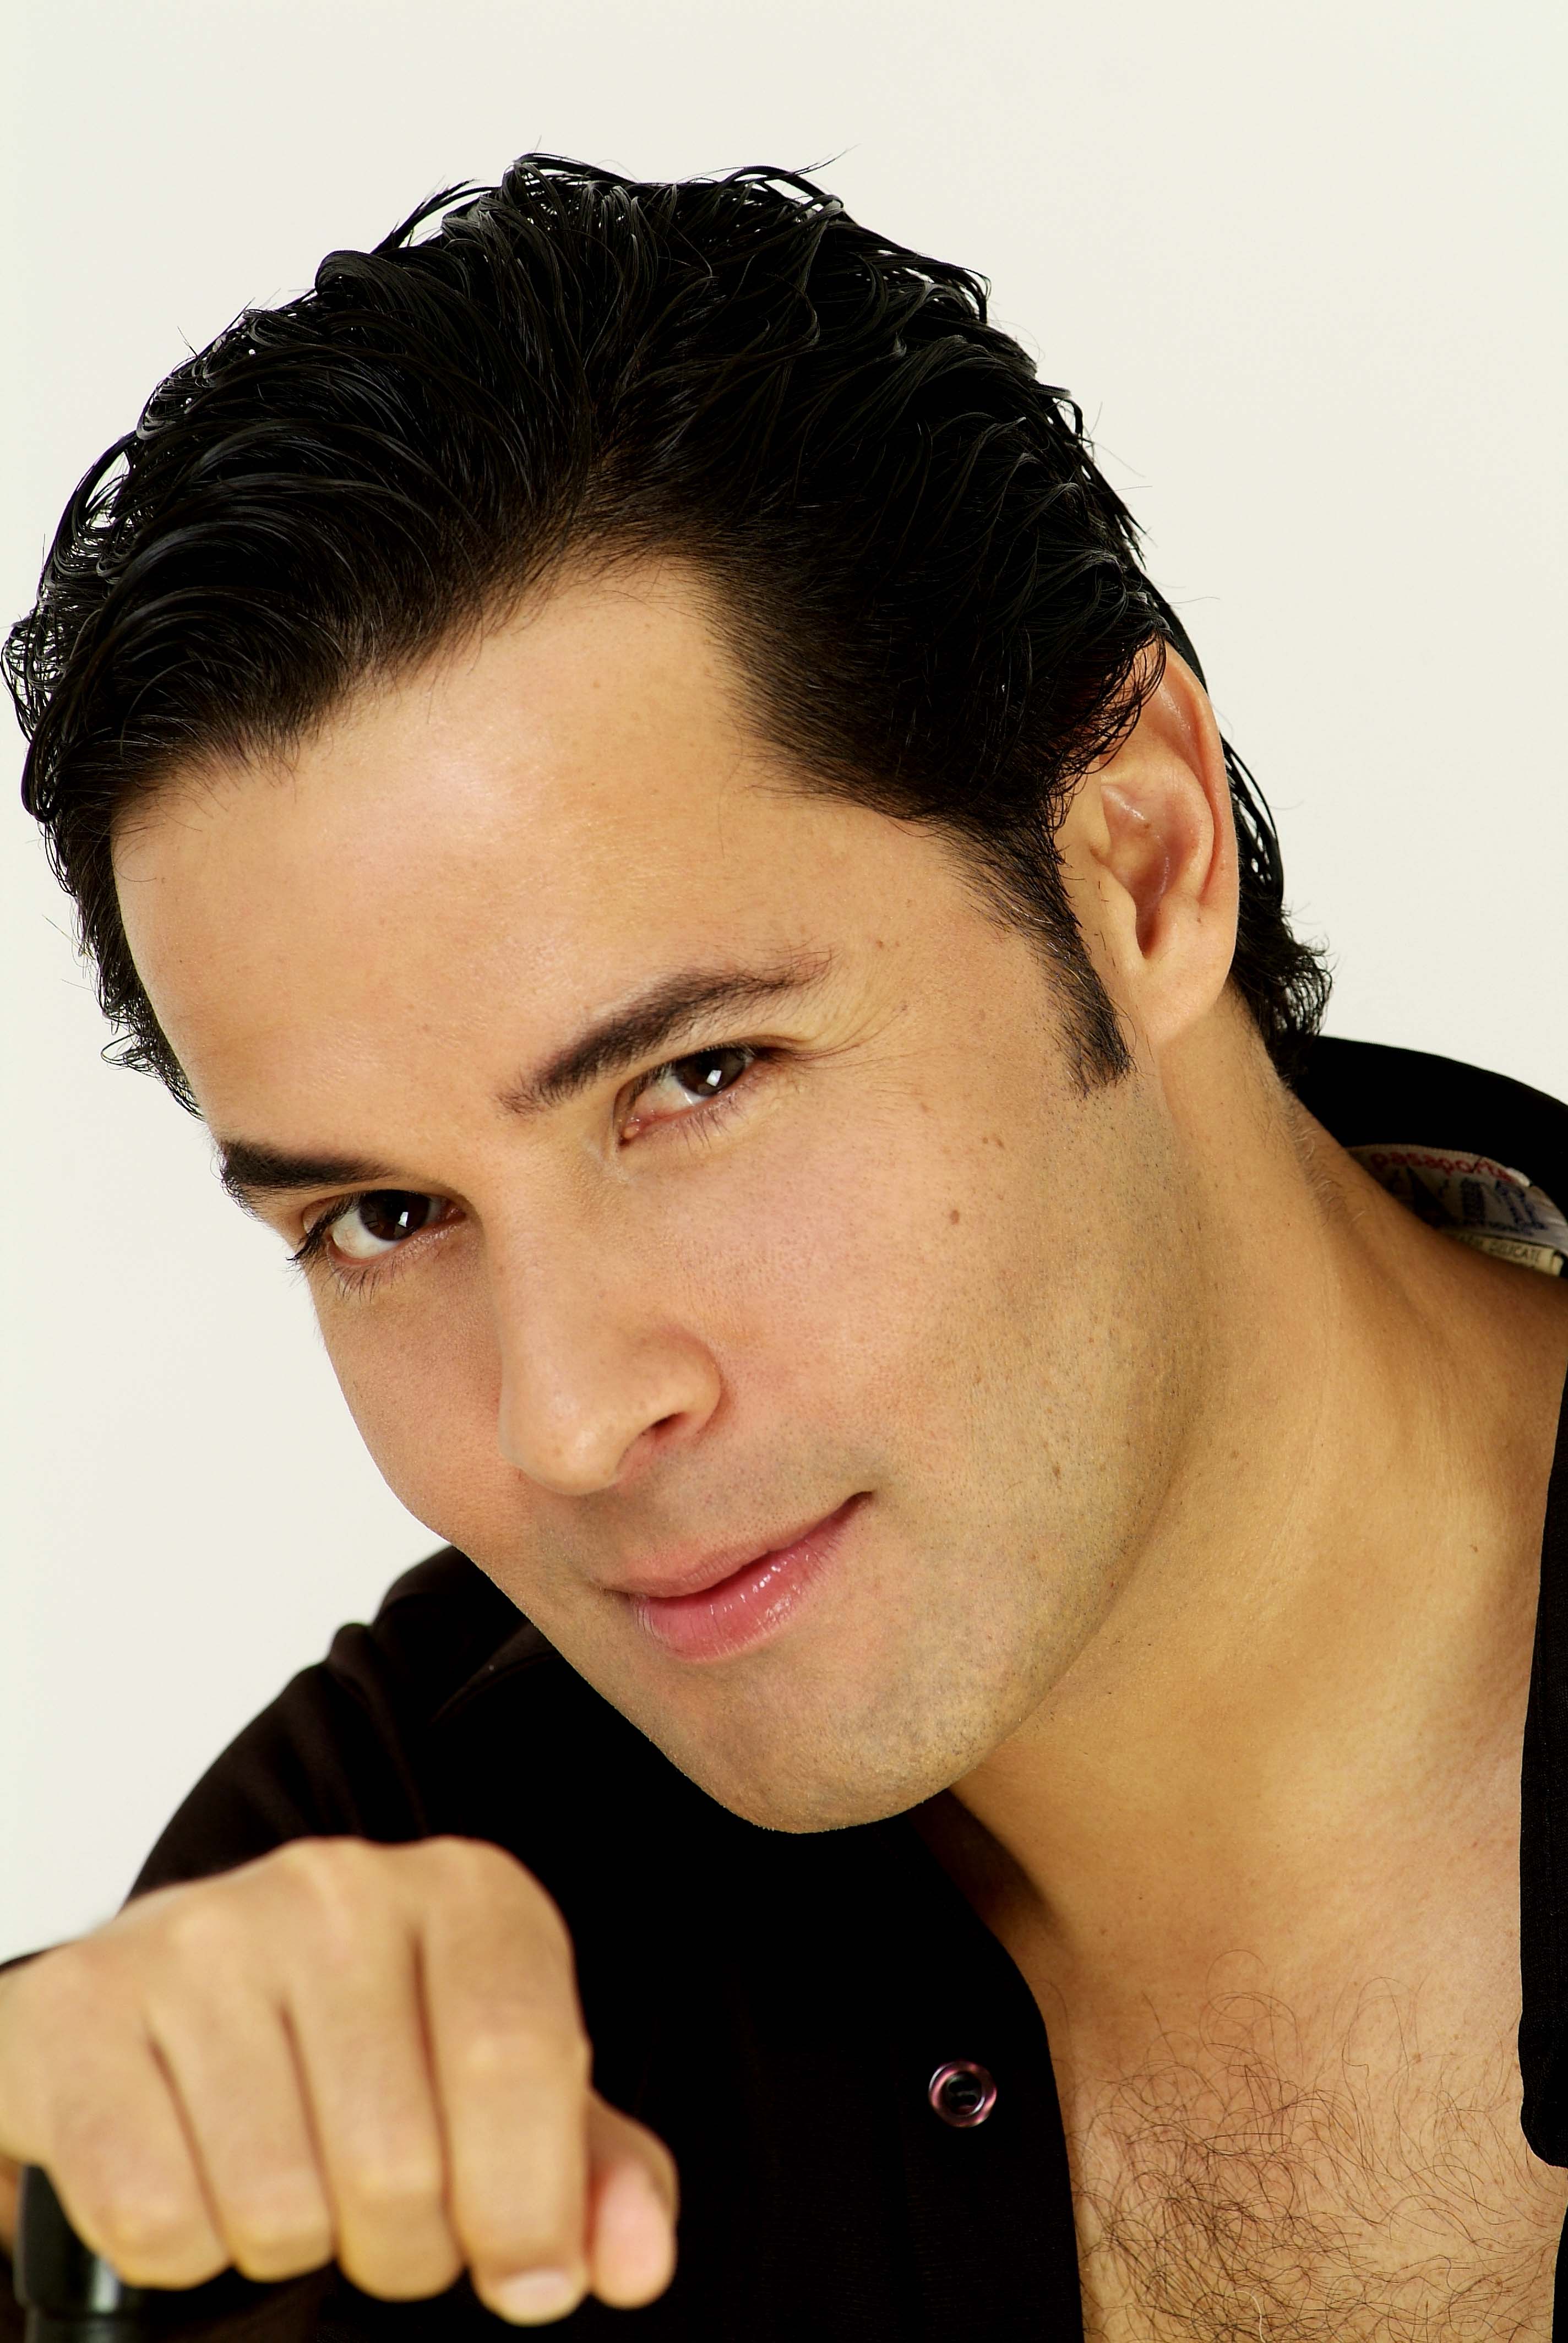 Luis' headshot for the Spanish Market media in the U.S. March 2007